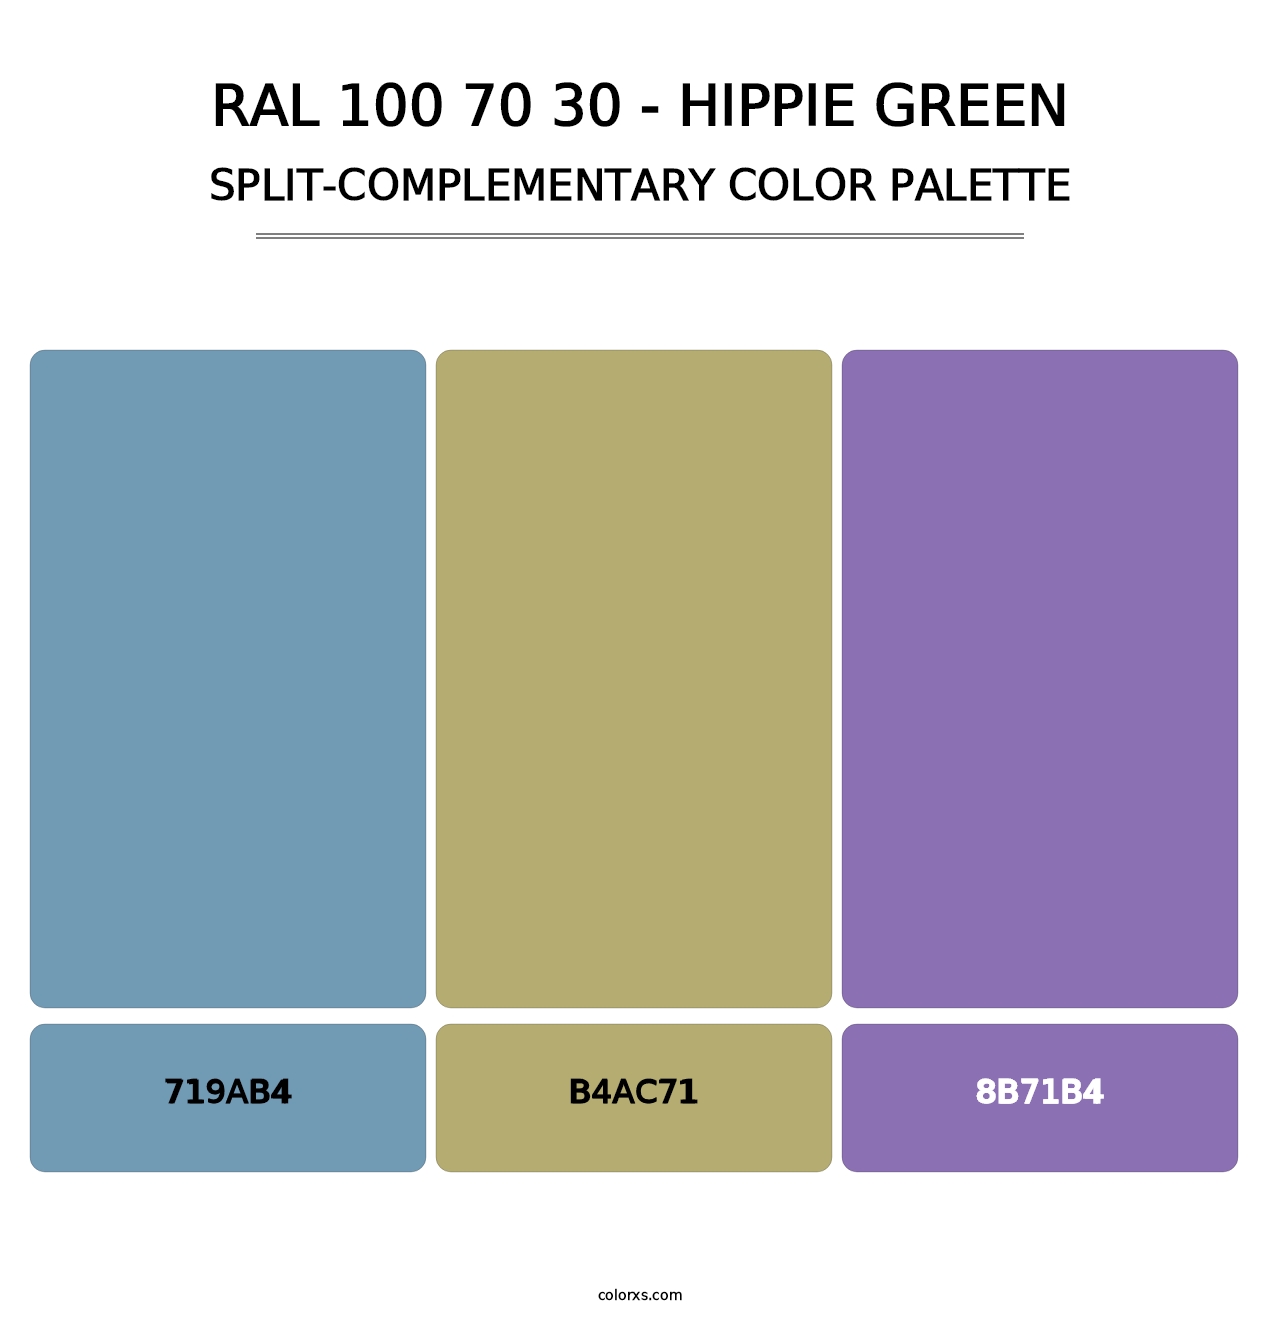 RAL 100 70 30 - Hippie Green - Split-Complementary Color Palette